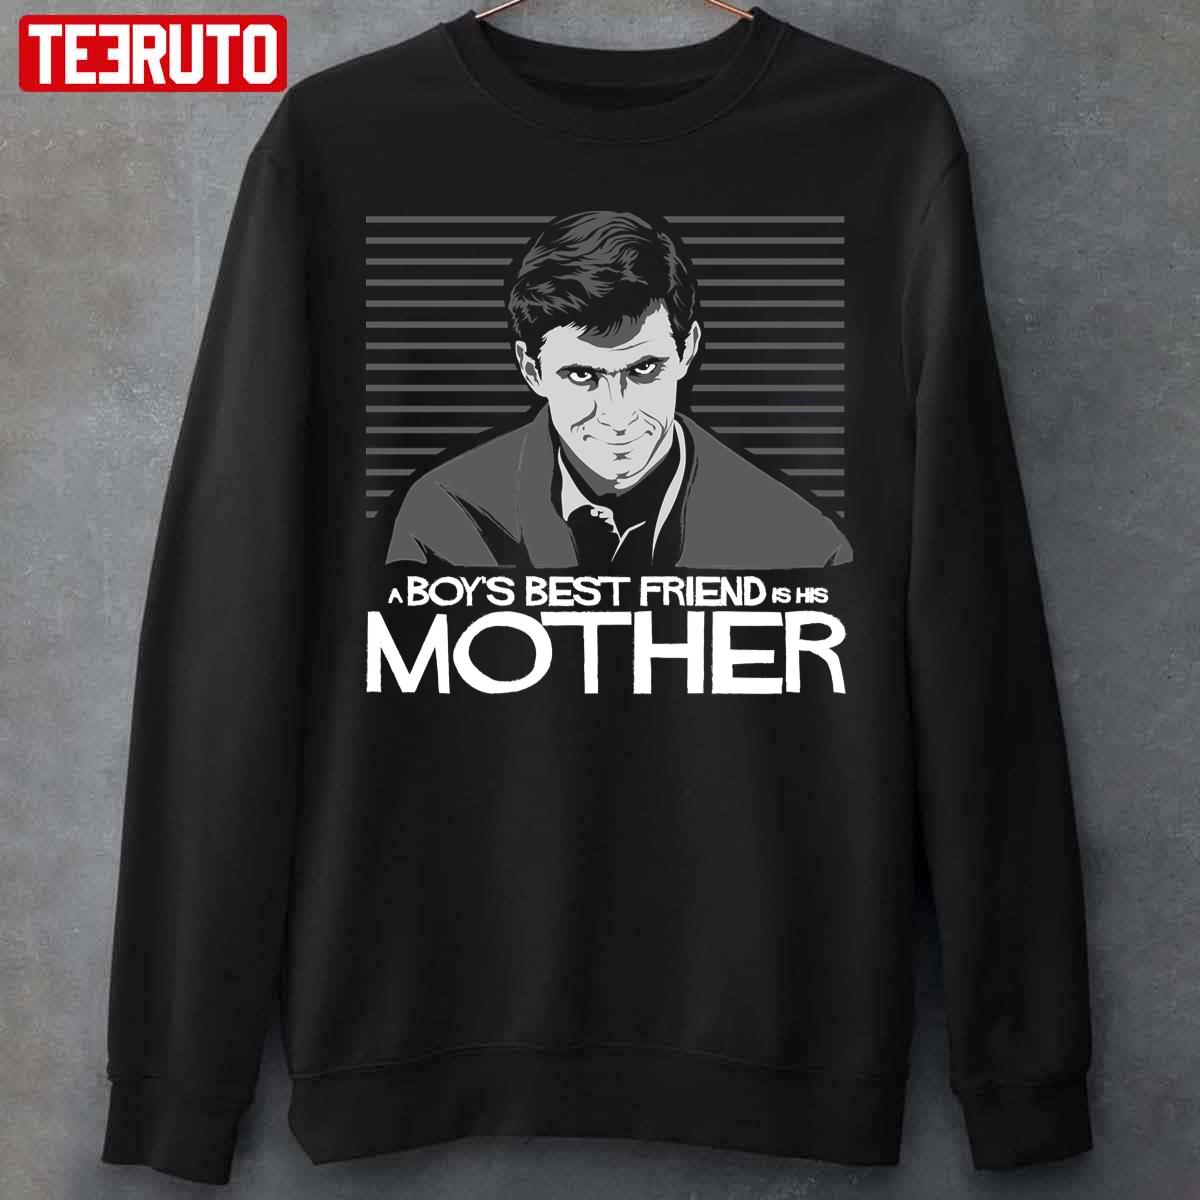 Psycho Funny Boys Best Friend Is His Mother Unisex T-Shirt - Teeruto